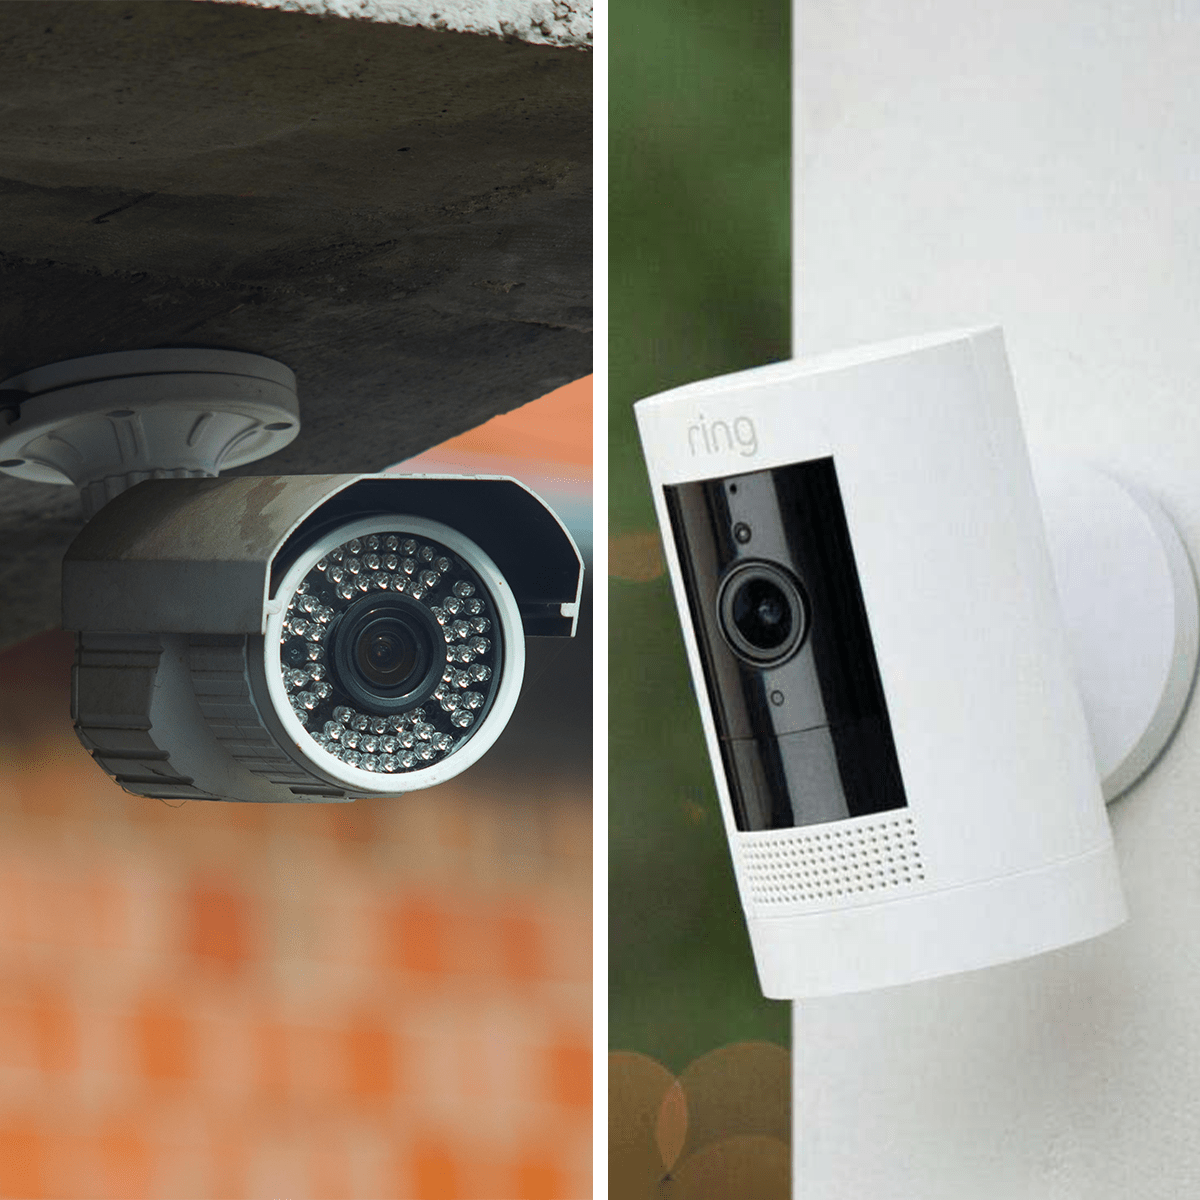 IP Camera vs. Cloud Camera: Which Is Right for You?